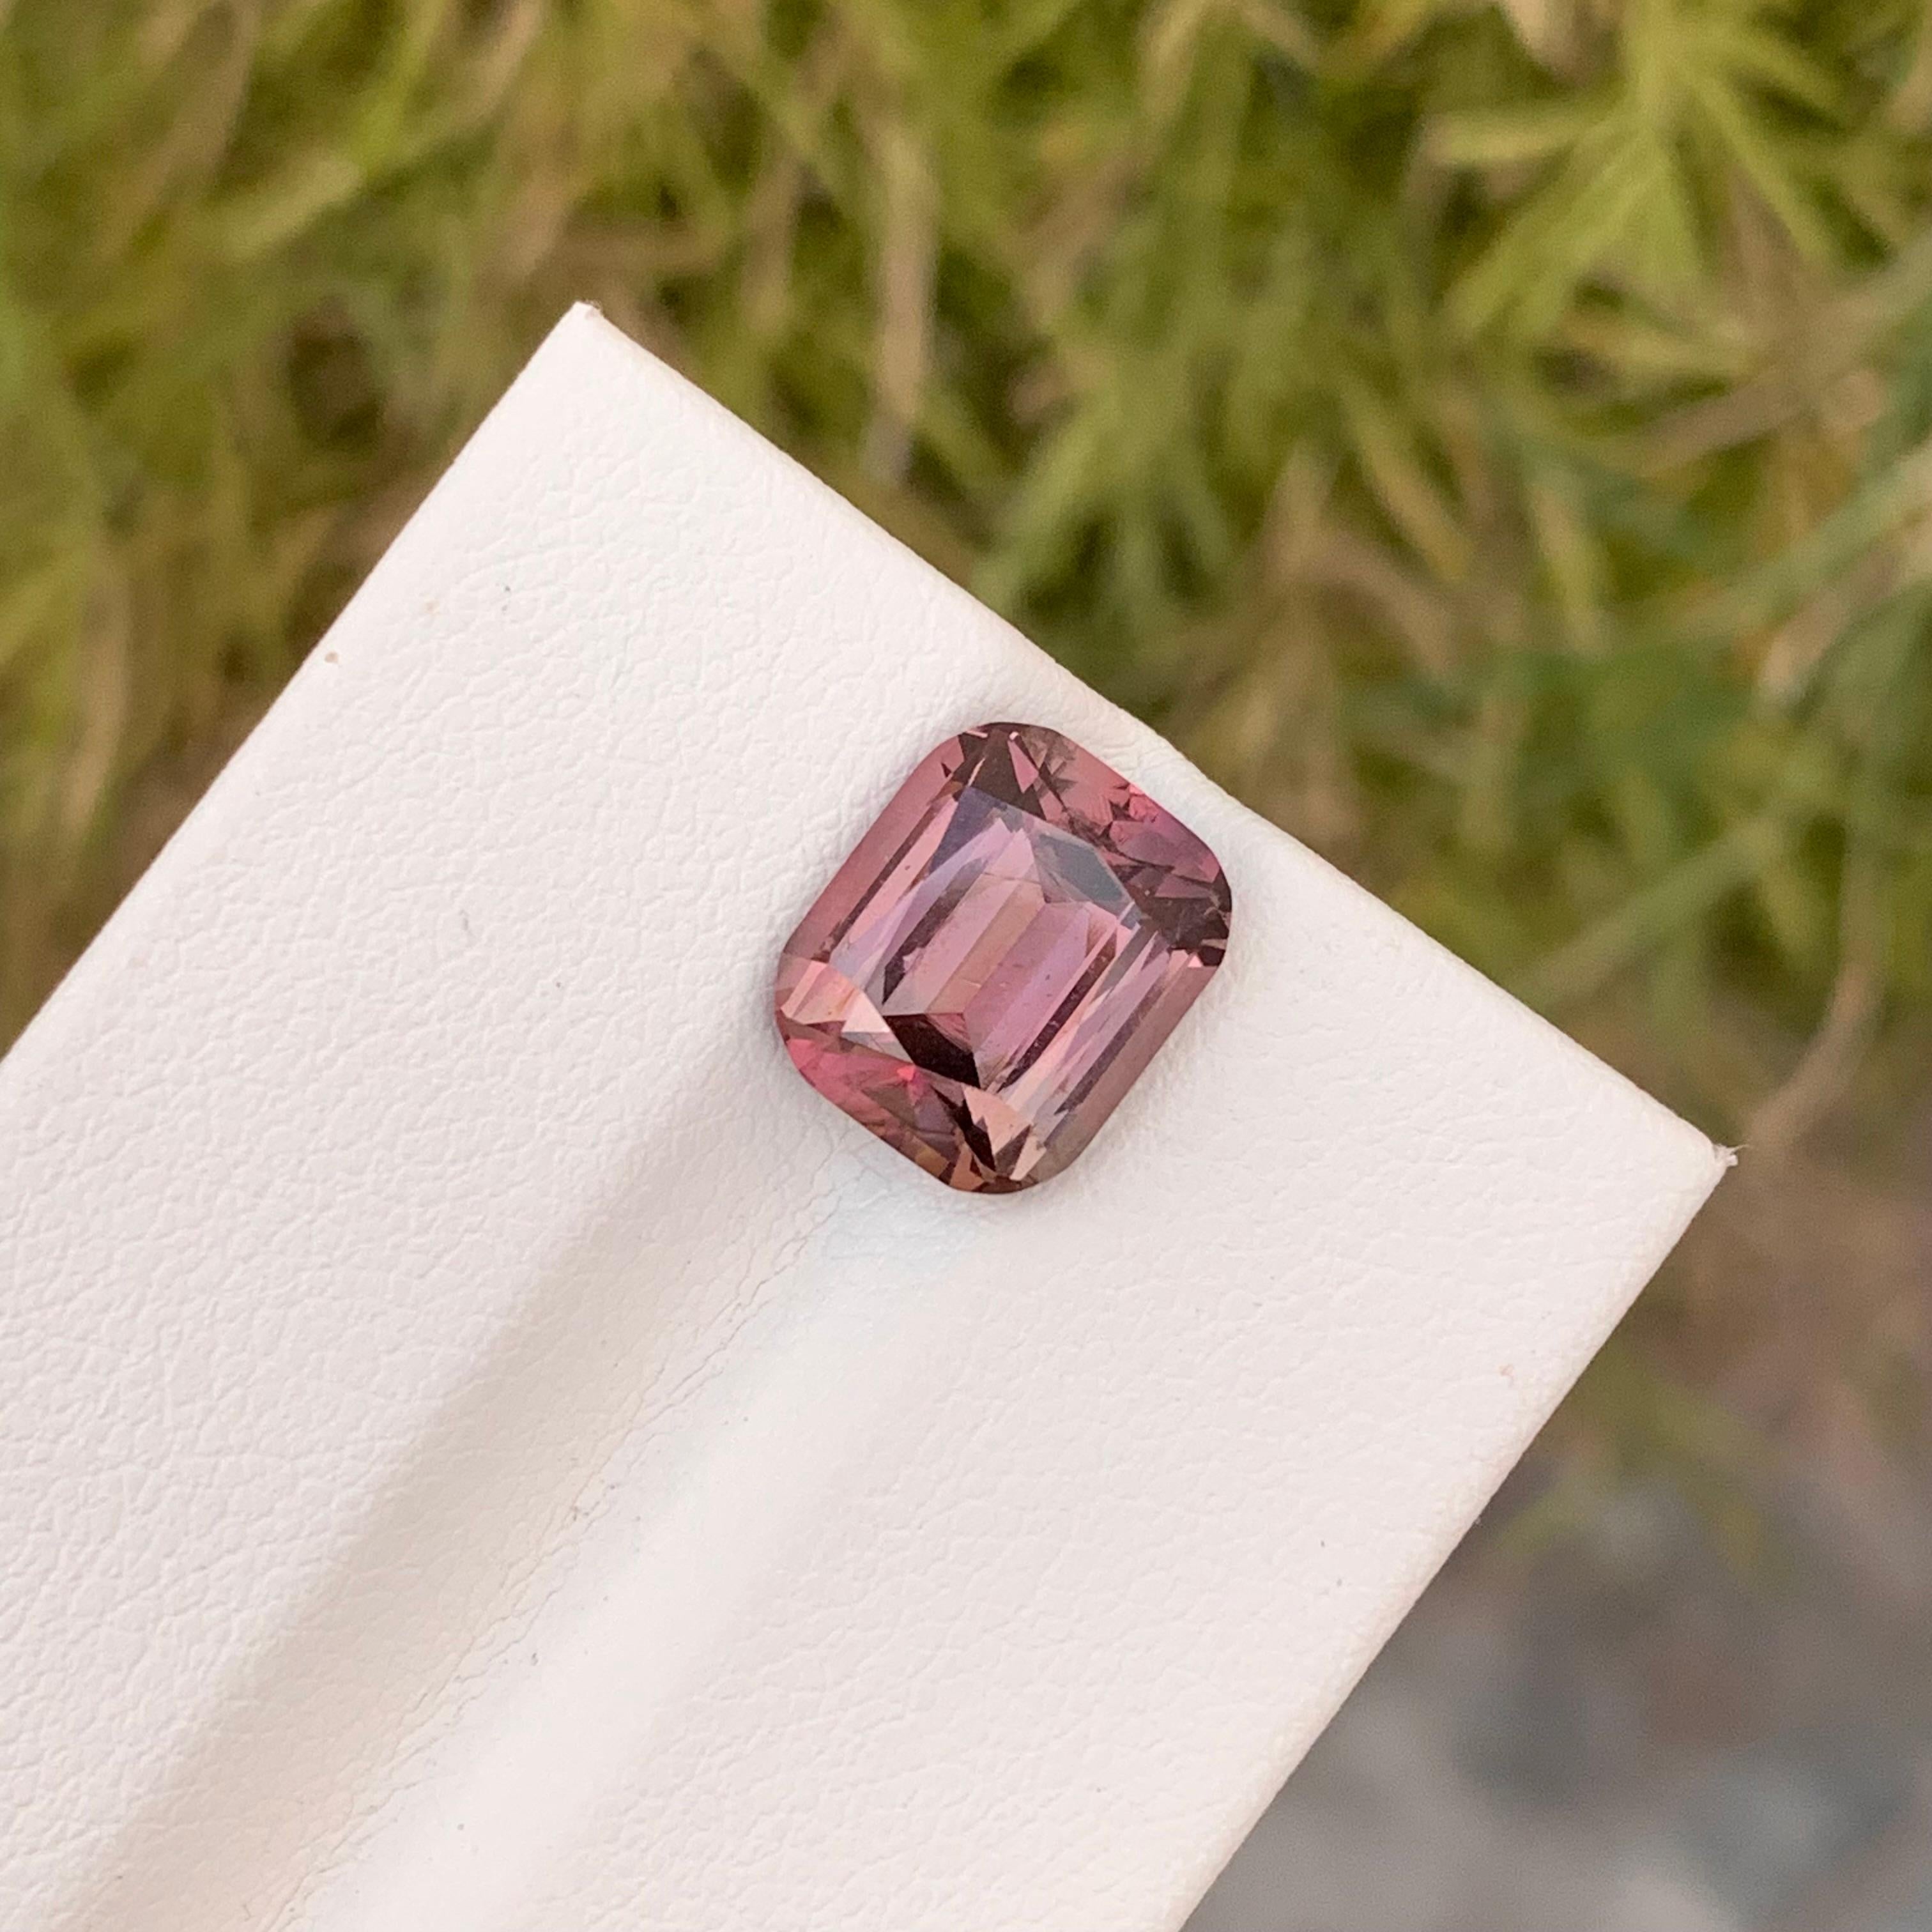 Loose Peach Pink Tourmaline

Weight: 3.75 Carats
Dimension: 10.1 x 8.5 x 5.6 Mm
Colour: Peach Pink 
Origin: Afghanistan 
Certificate: On Demand

Tourmaline is a captivating gemstone known for its remarkable variety of colors, making it a favorite